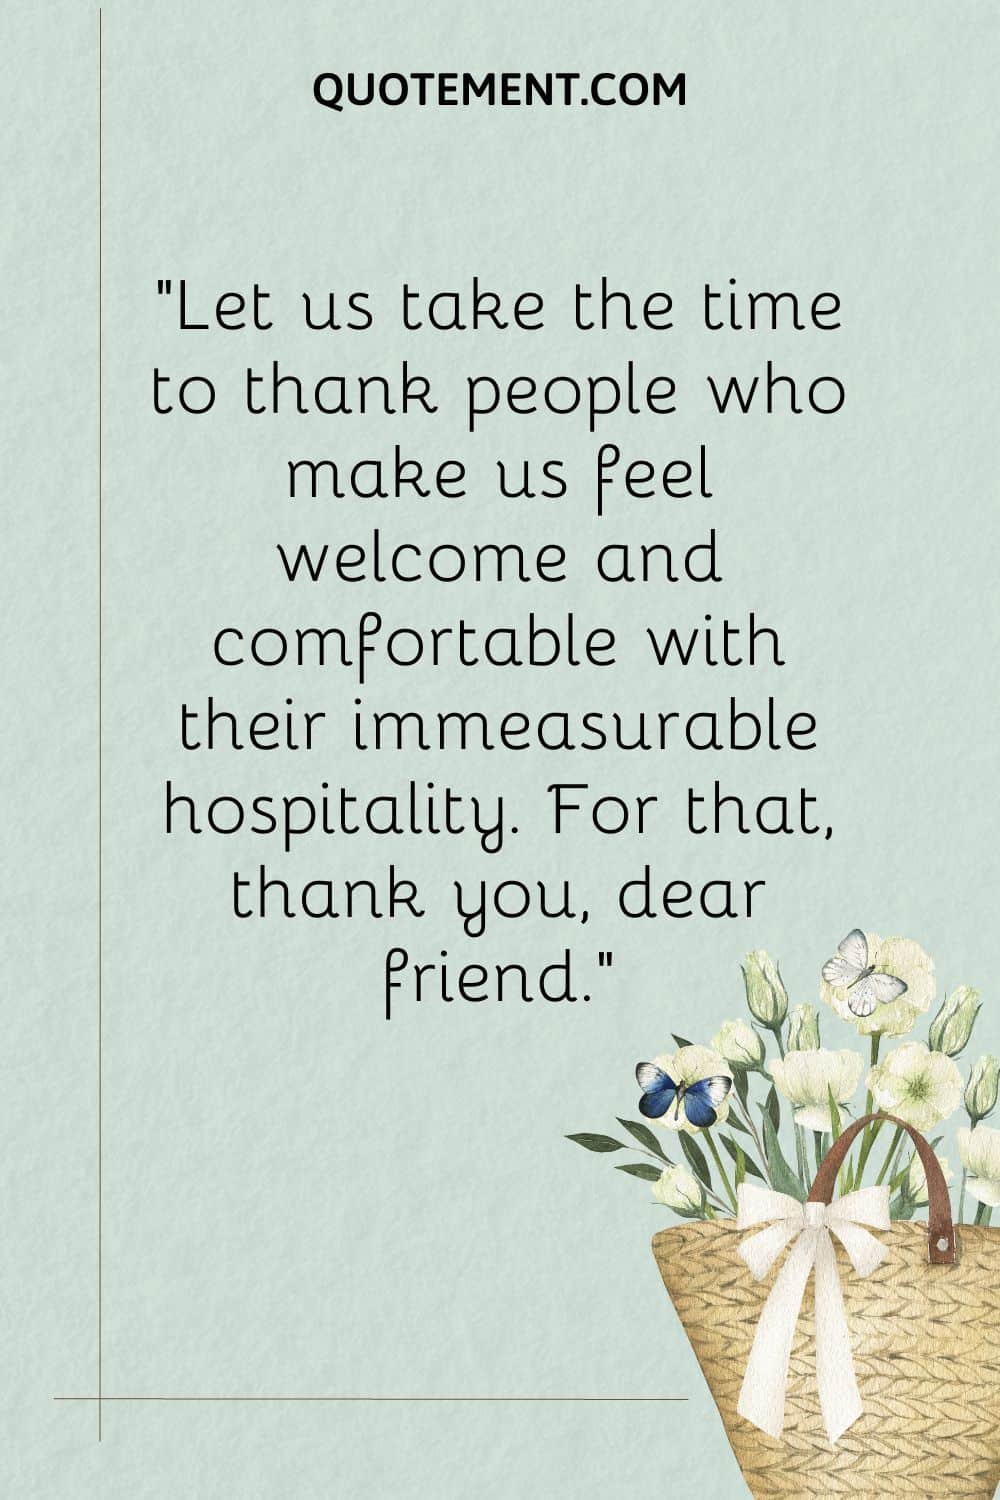 Let us take the time to thank people who make us feel welcome and comfortable with their immeasurable hospitality